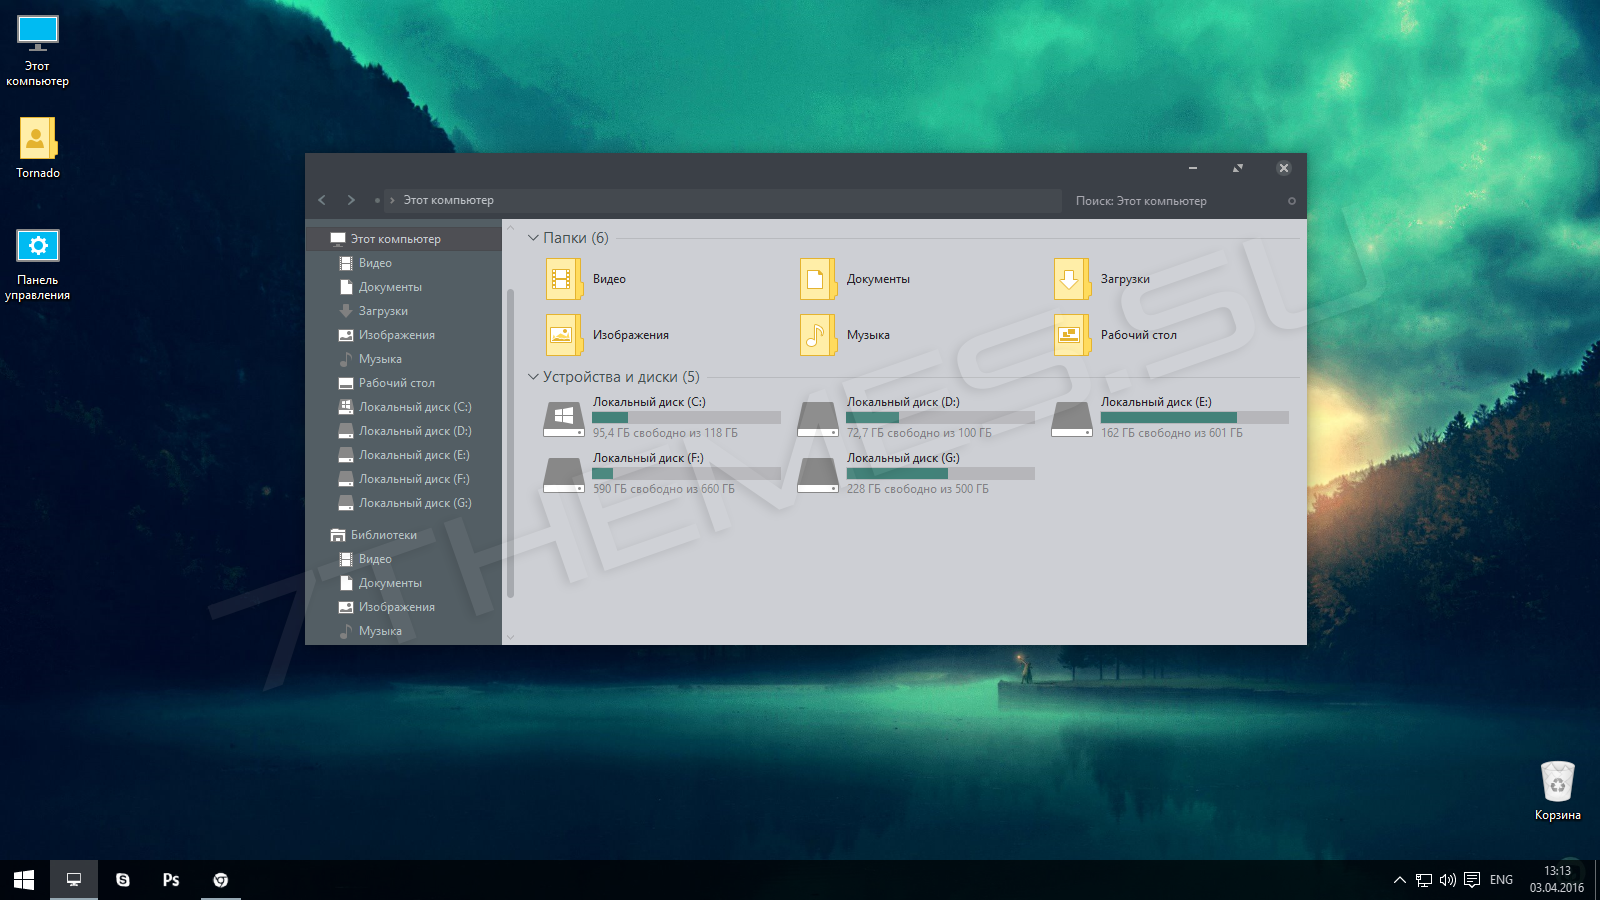 ades theme for windows 10 free download